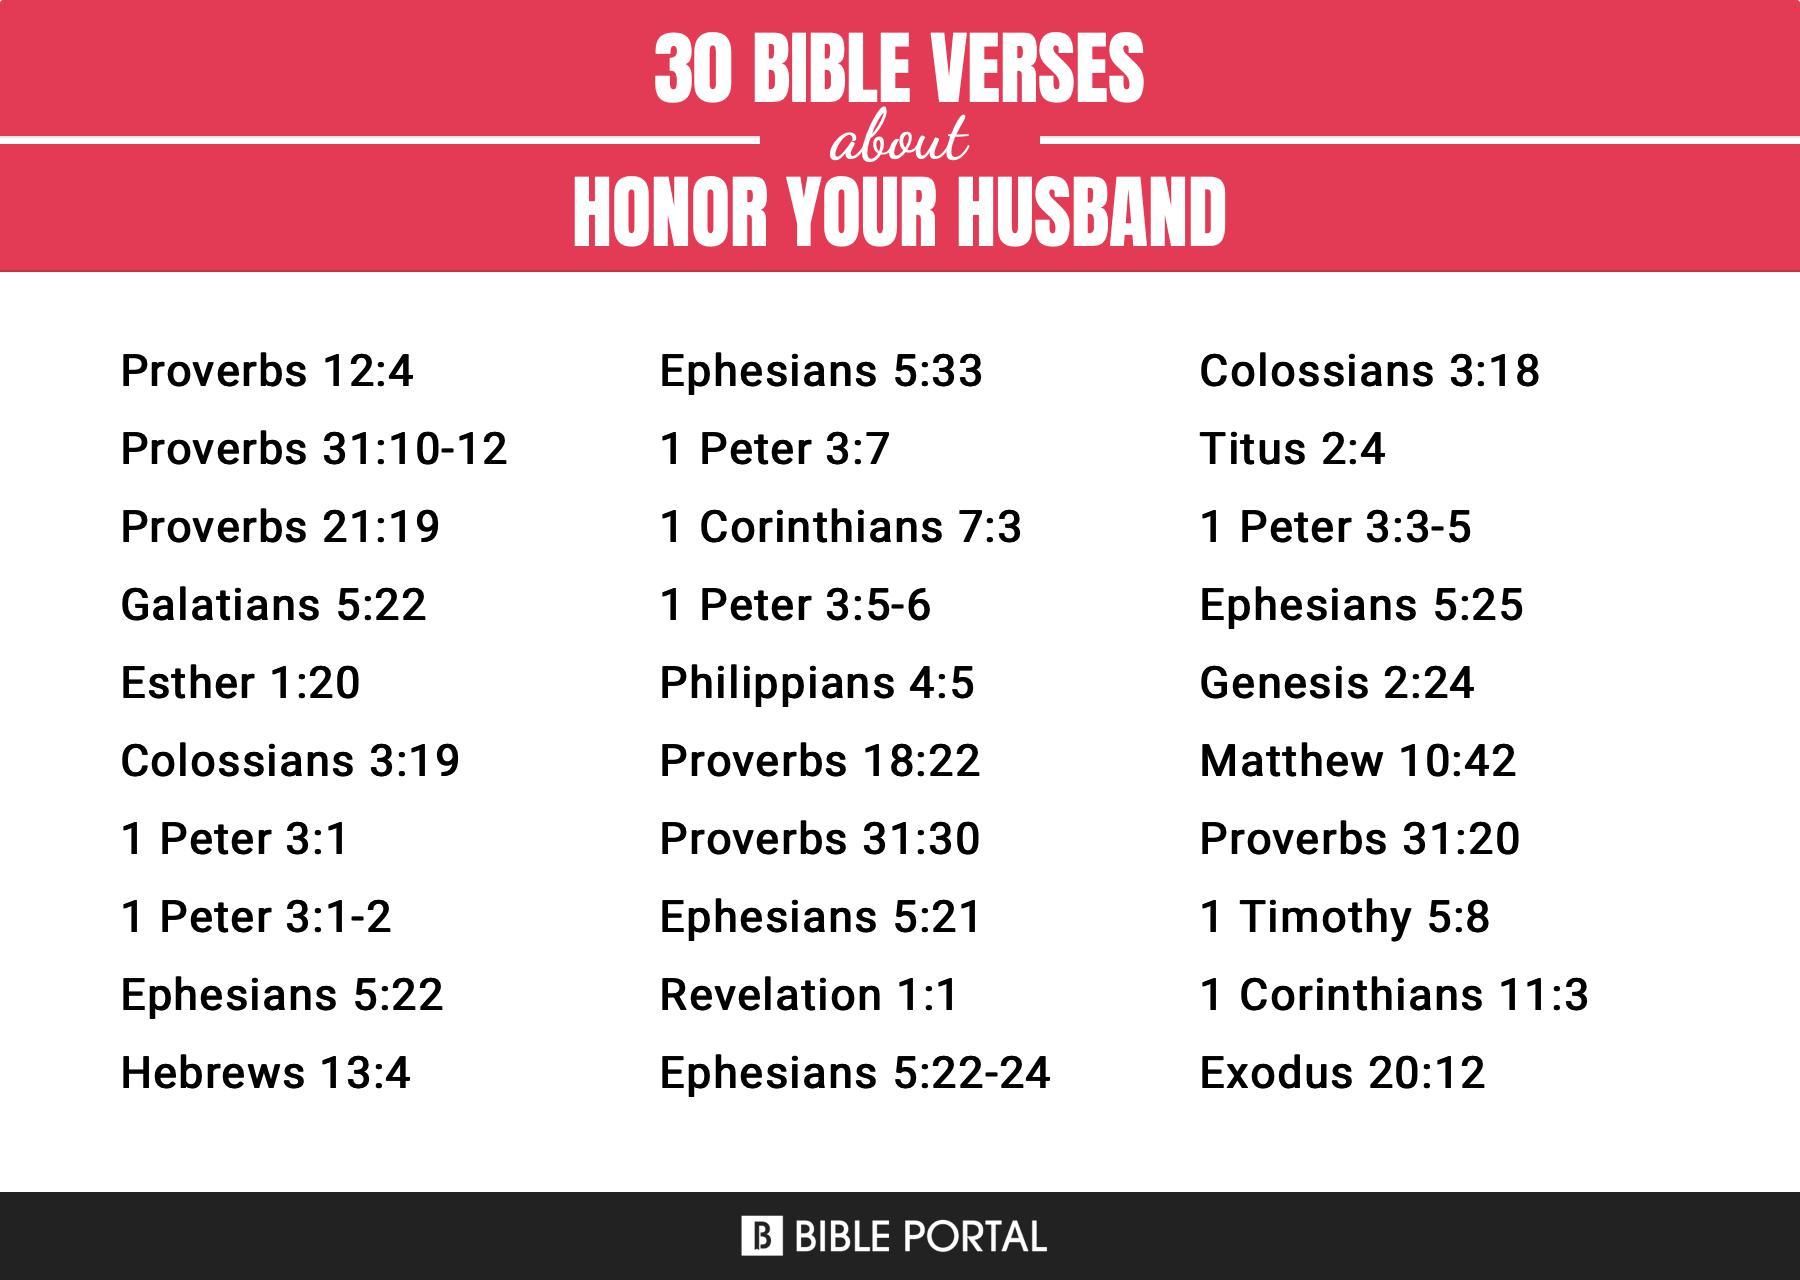 What Does the Bible Say about Honor Your Husband?